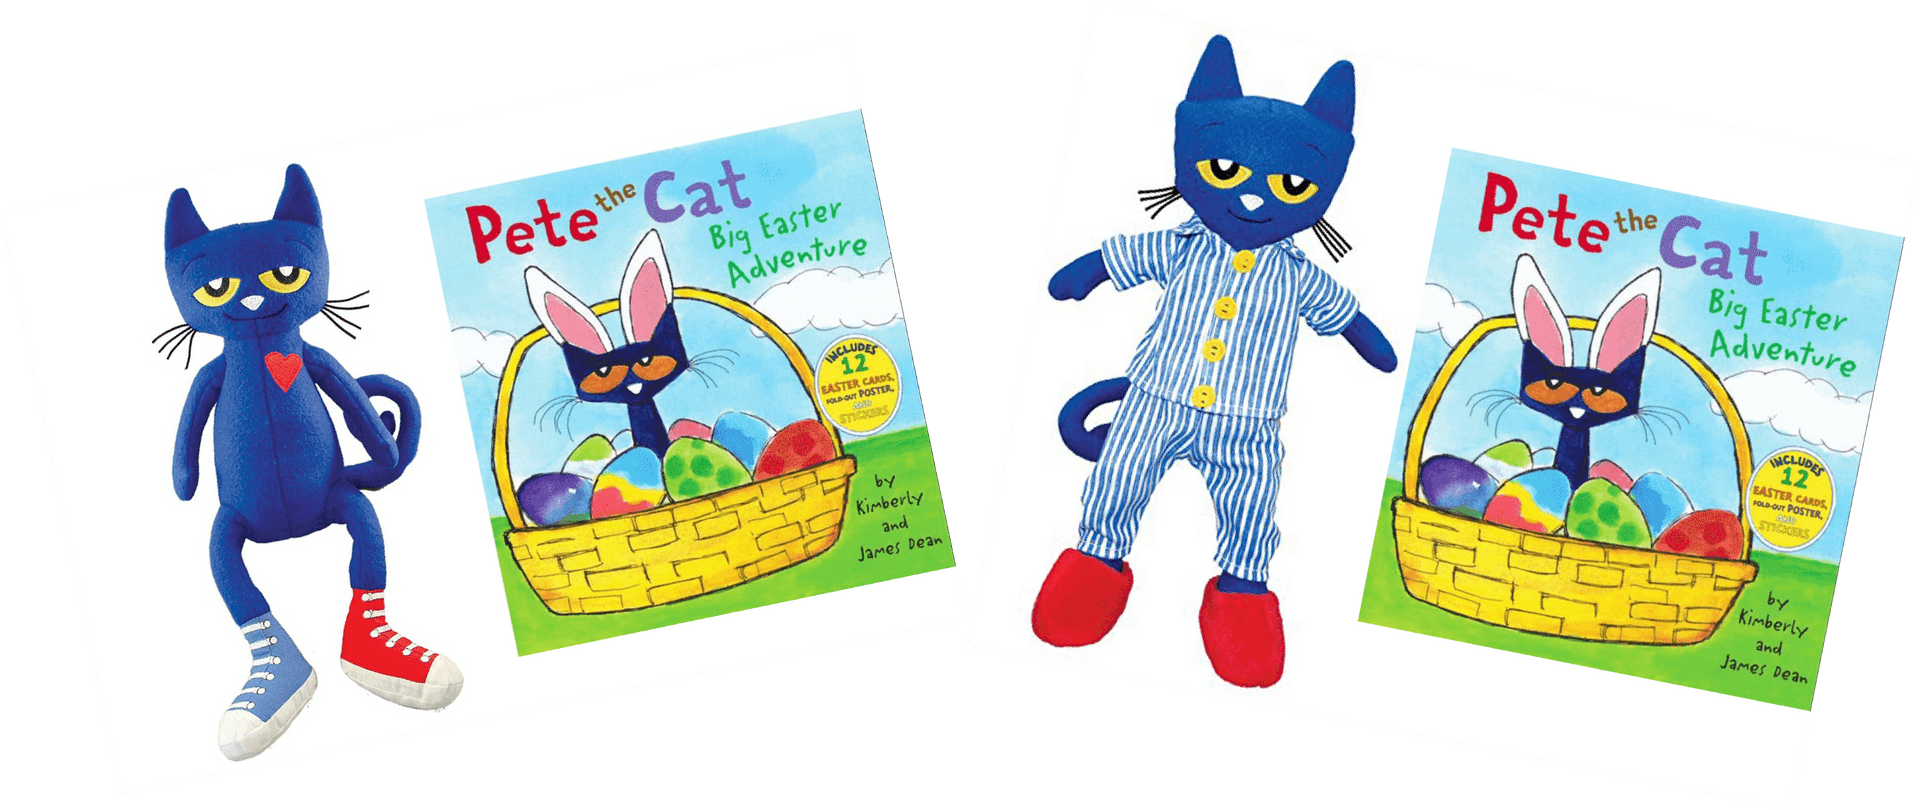 Pete The Cat Easter Adventure Promotional Material PNG image